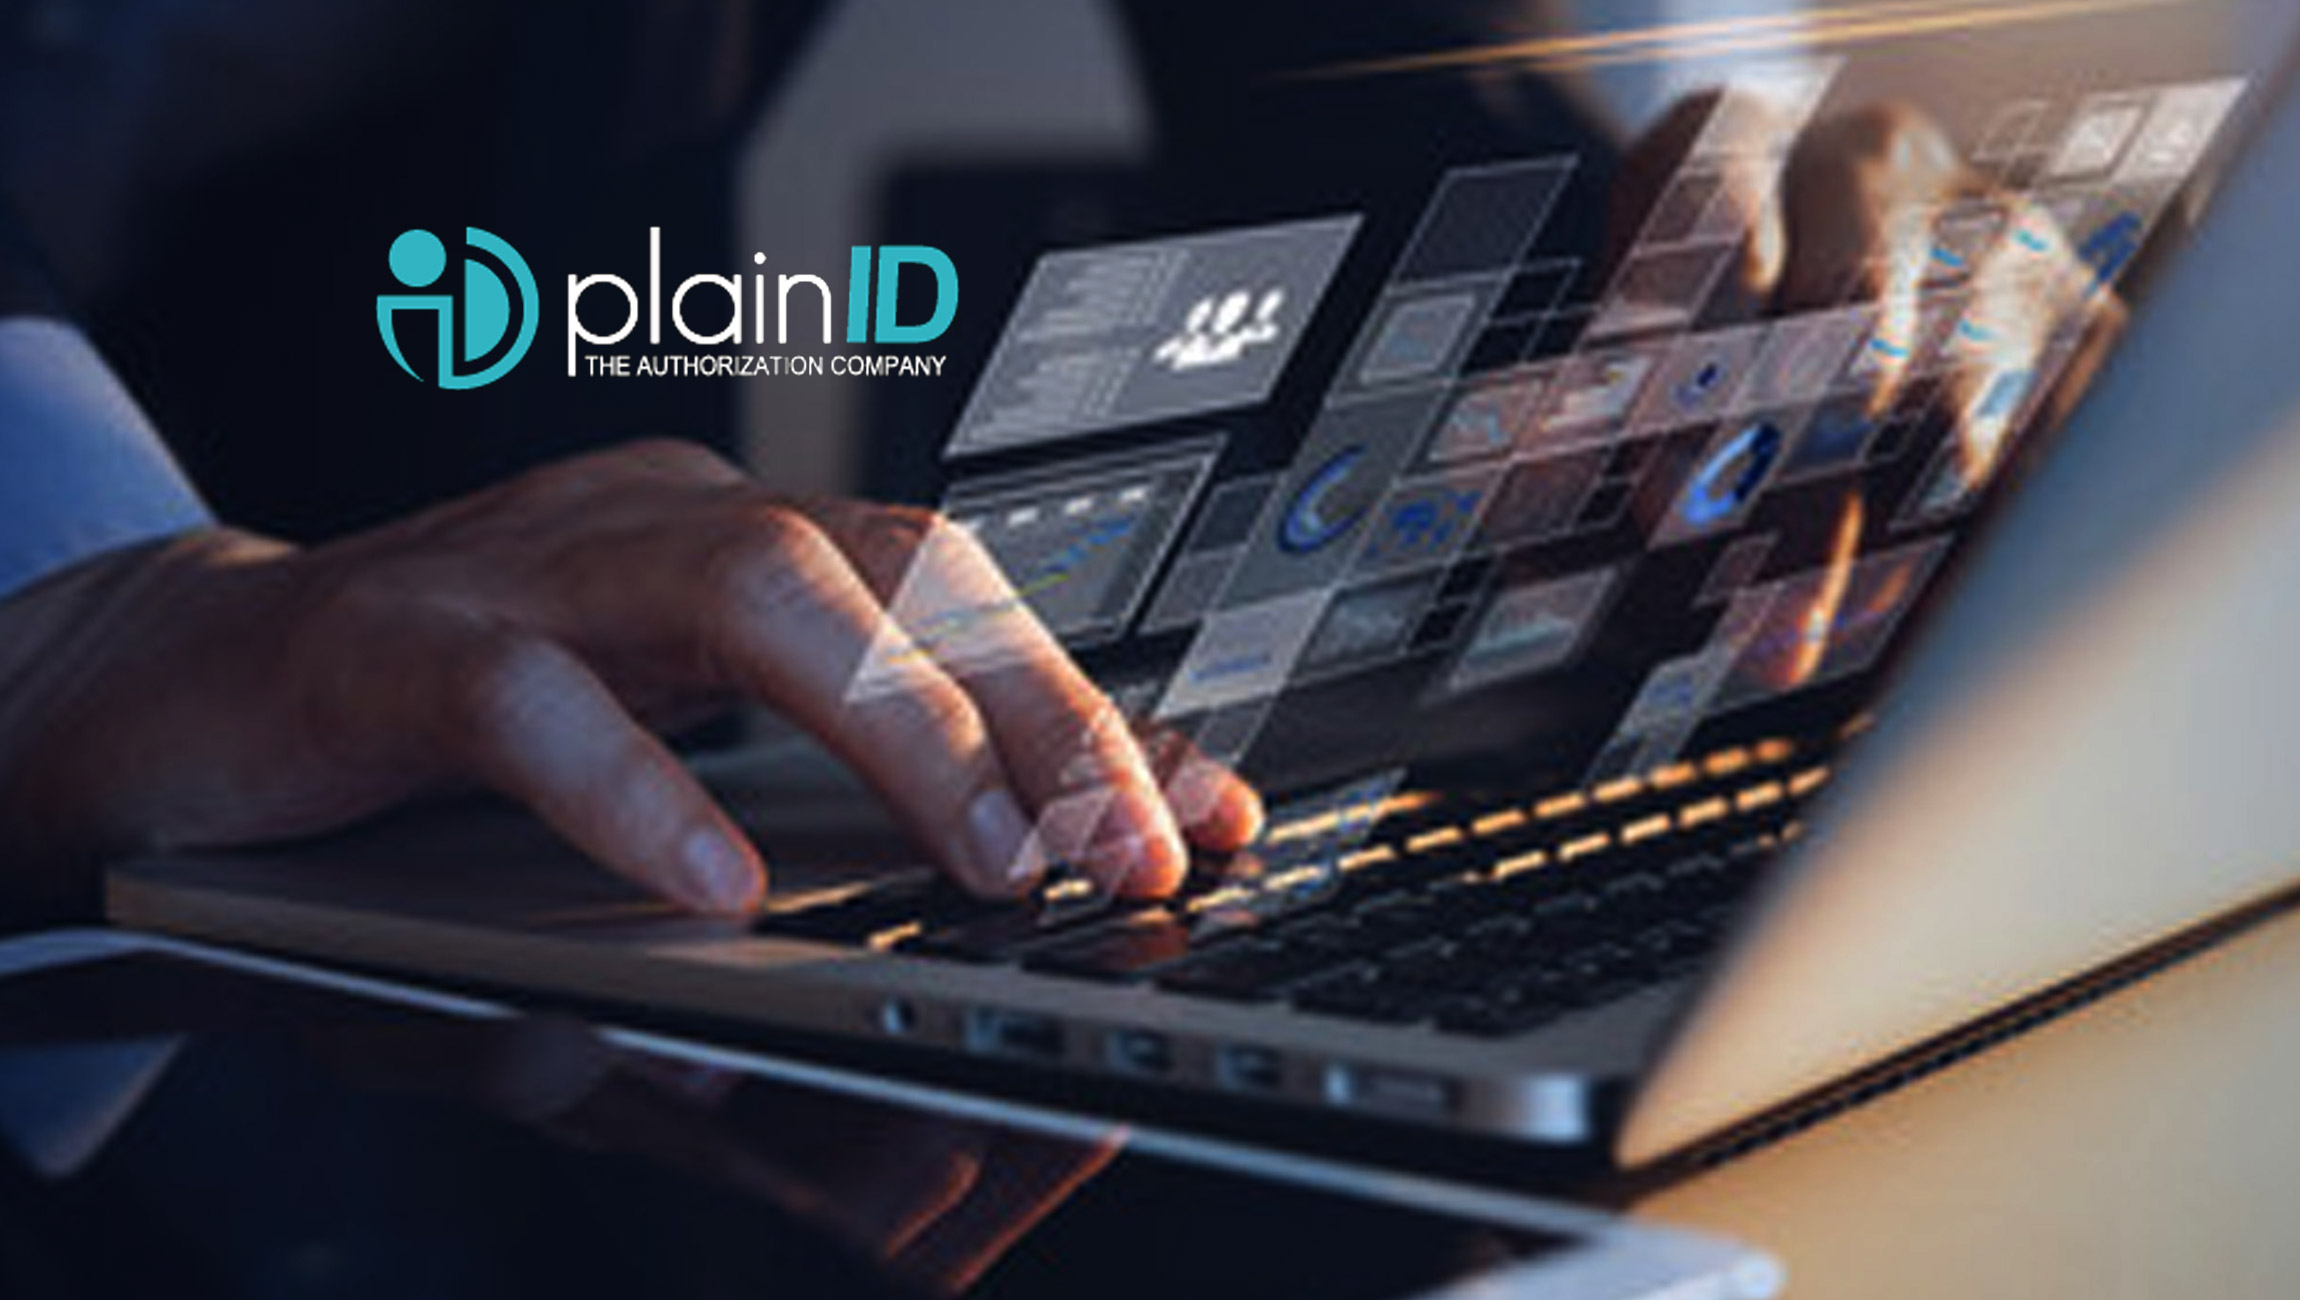 PlainID, The Authorization Company, Reveals Industry’s First Authorization-as-a-Service Platform Powered by Policy-Based Access Control 1